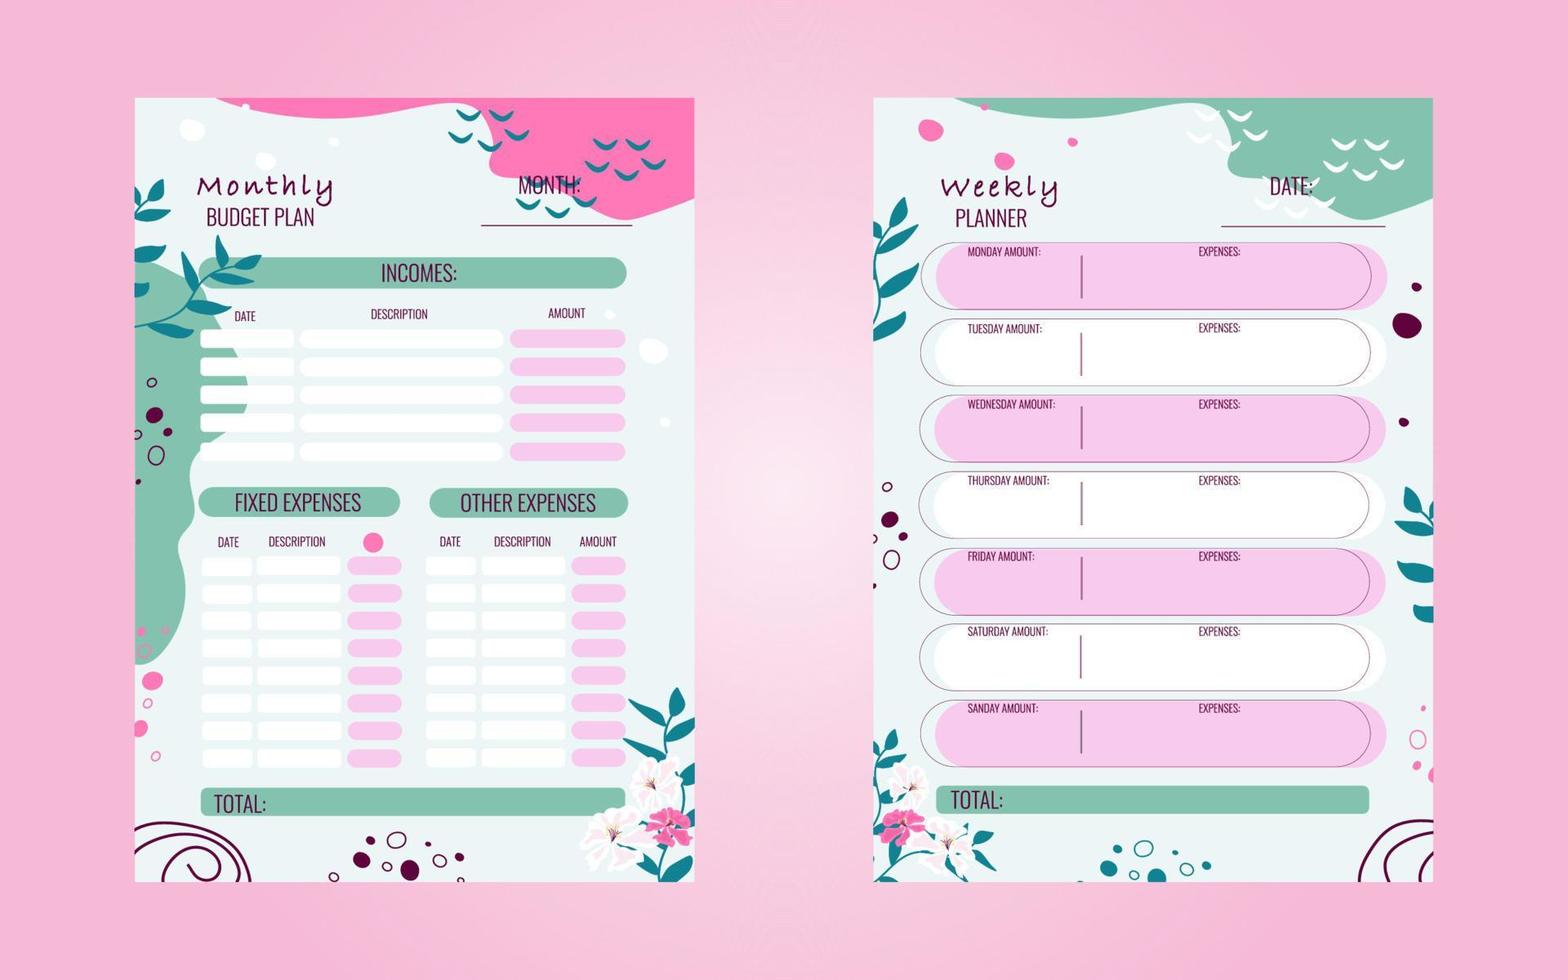 Templates for weekly and monthly planners. Business organizer page.Vector illustration of stationery vector